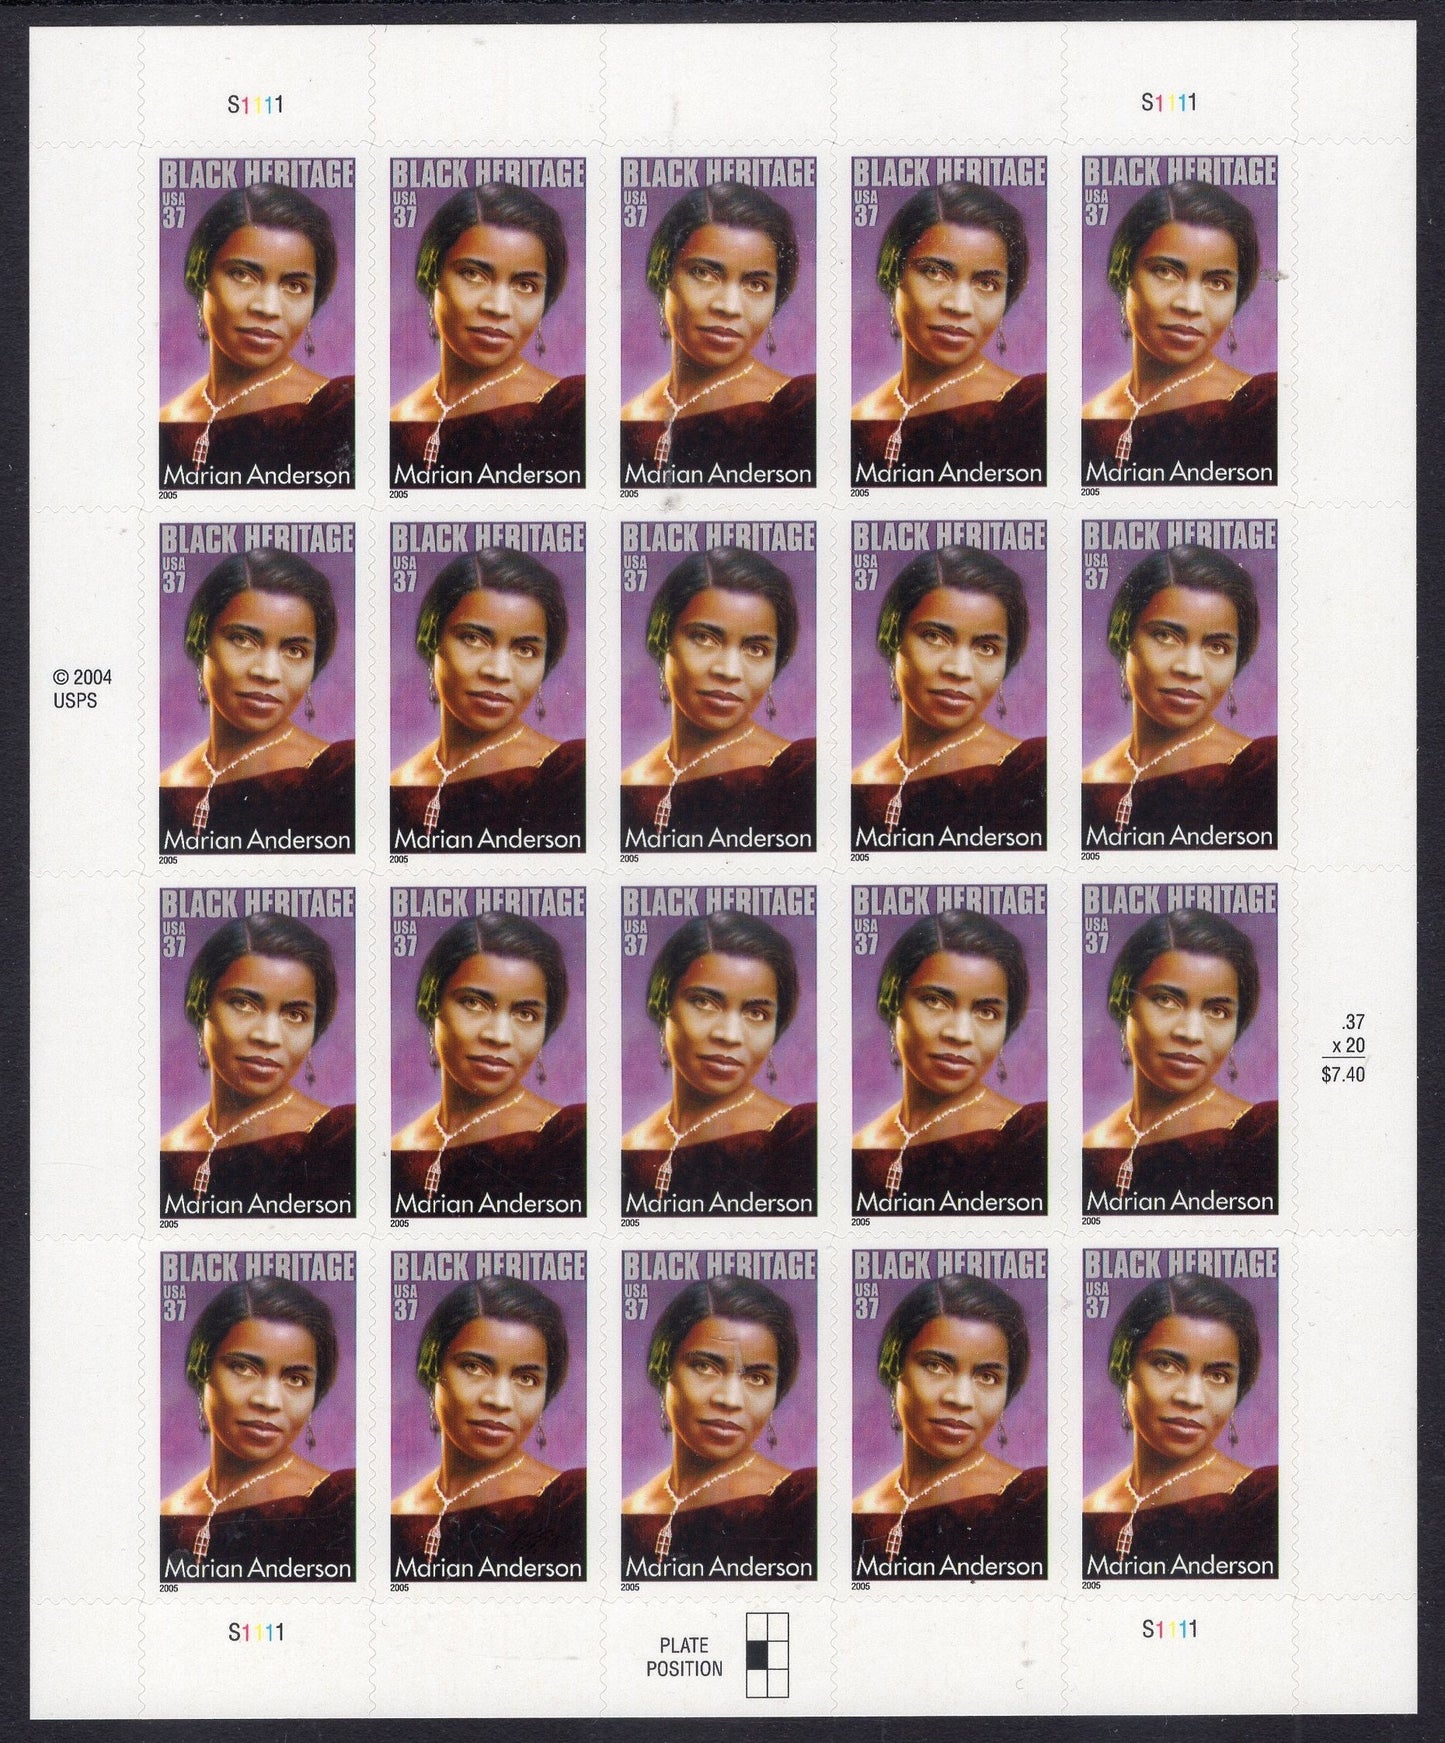 MARIAN ANDERSON HERITAGE Black American Singer Opera Sheet of 20 Stamps Fresh, Bright - Issued in 2005 s3896 -